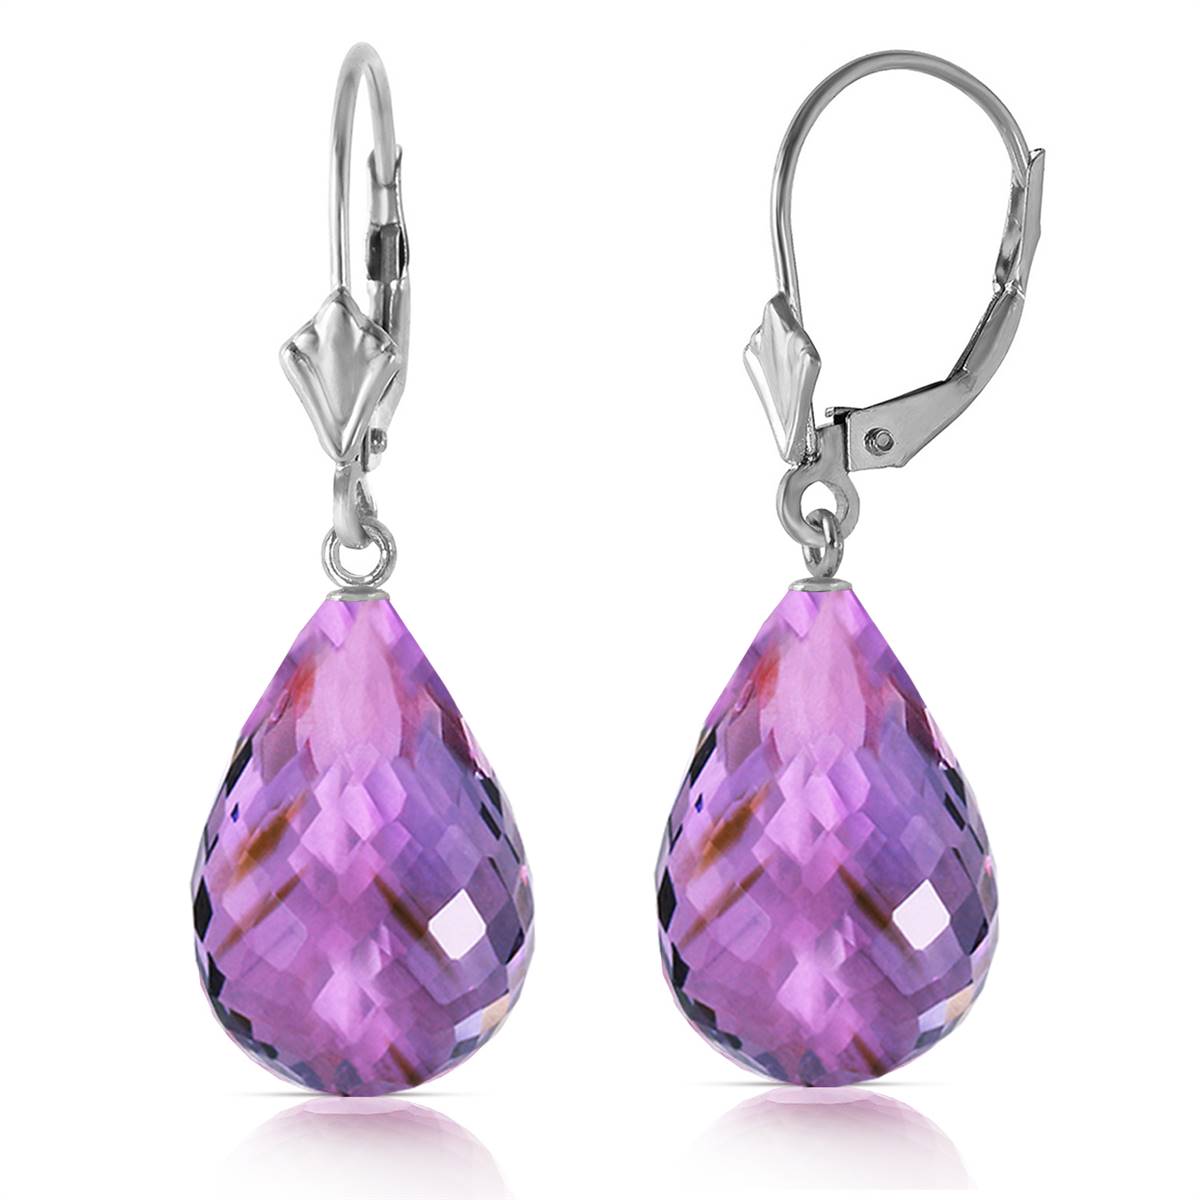 14 Carat 14K Solid White Gold Almost Touching Amethyst Earrings